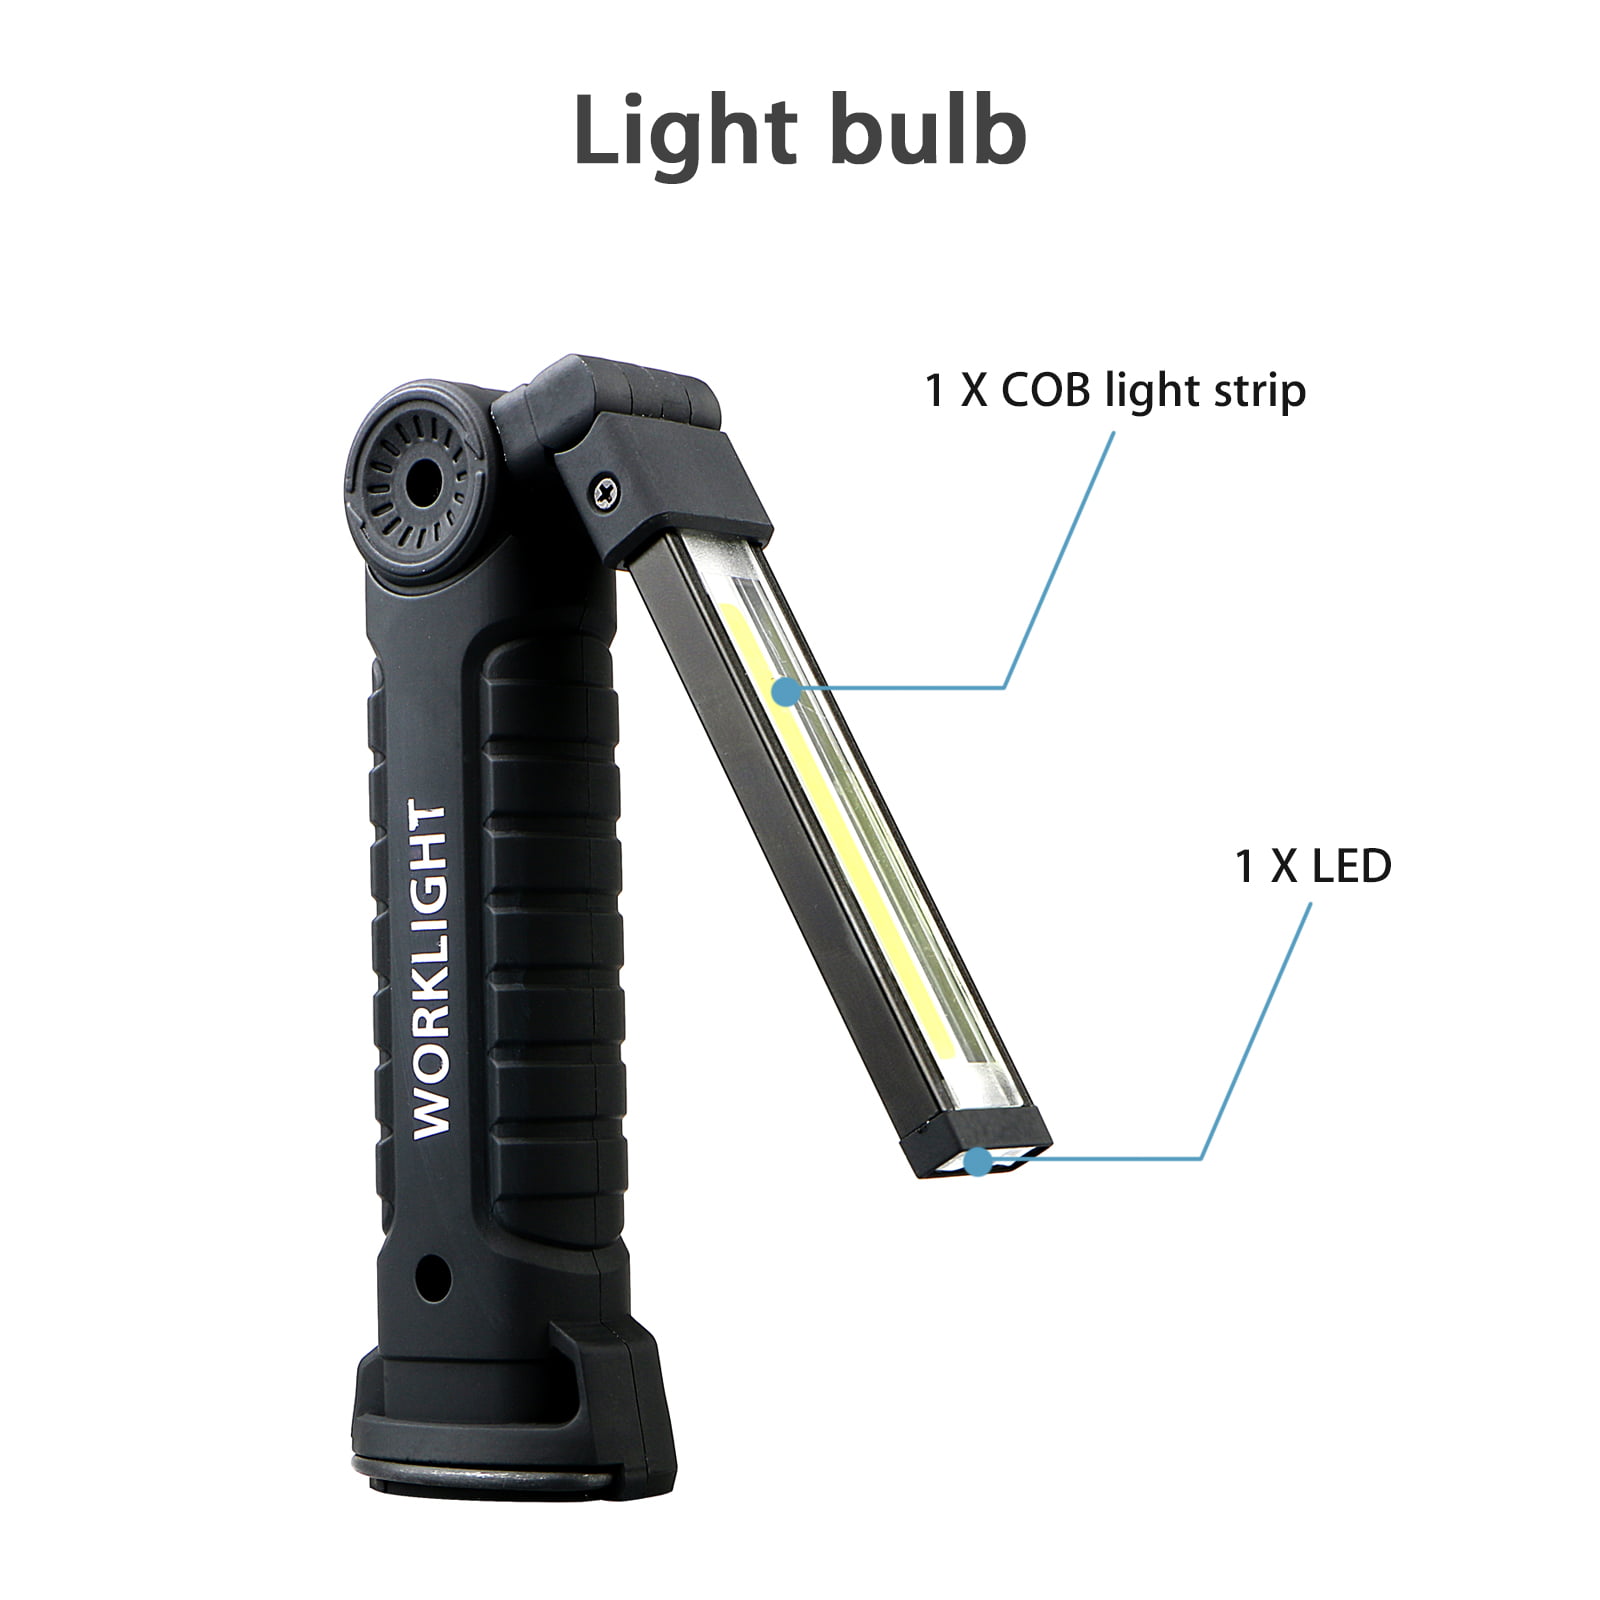 Workshop COB LED Inspection Lamp Torch Magnetic Work Light Portable Mini Flashlight with Magnetic Base and Hook for Home Emergency Use WOMAO USB Rechargeable Work Light 